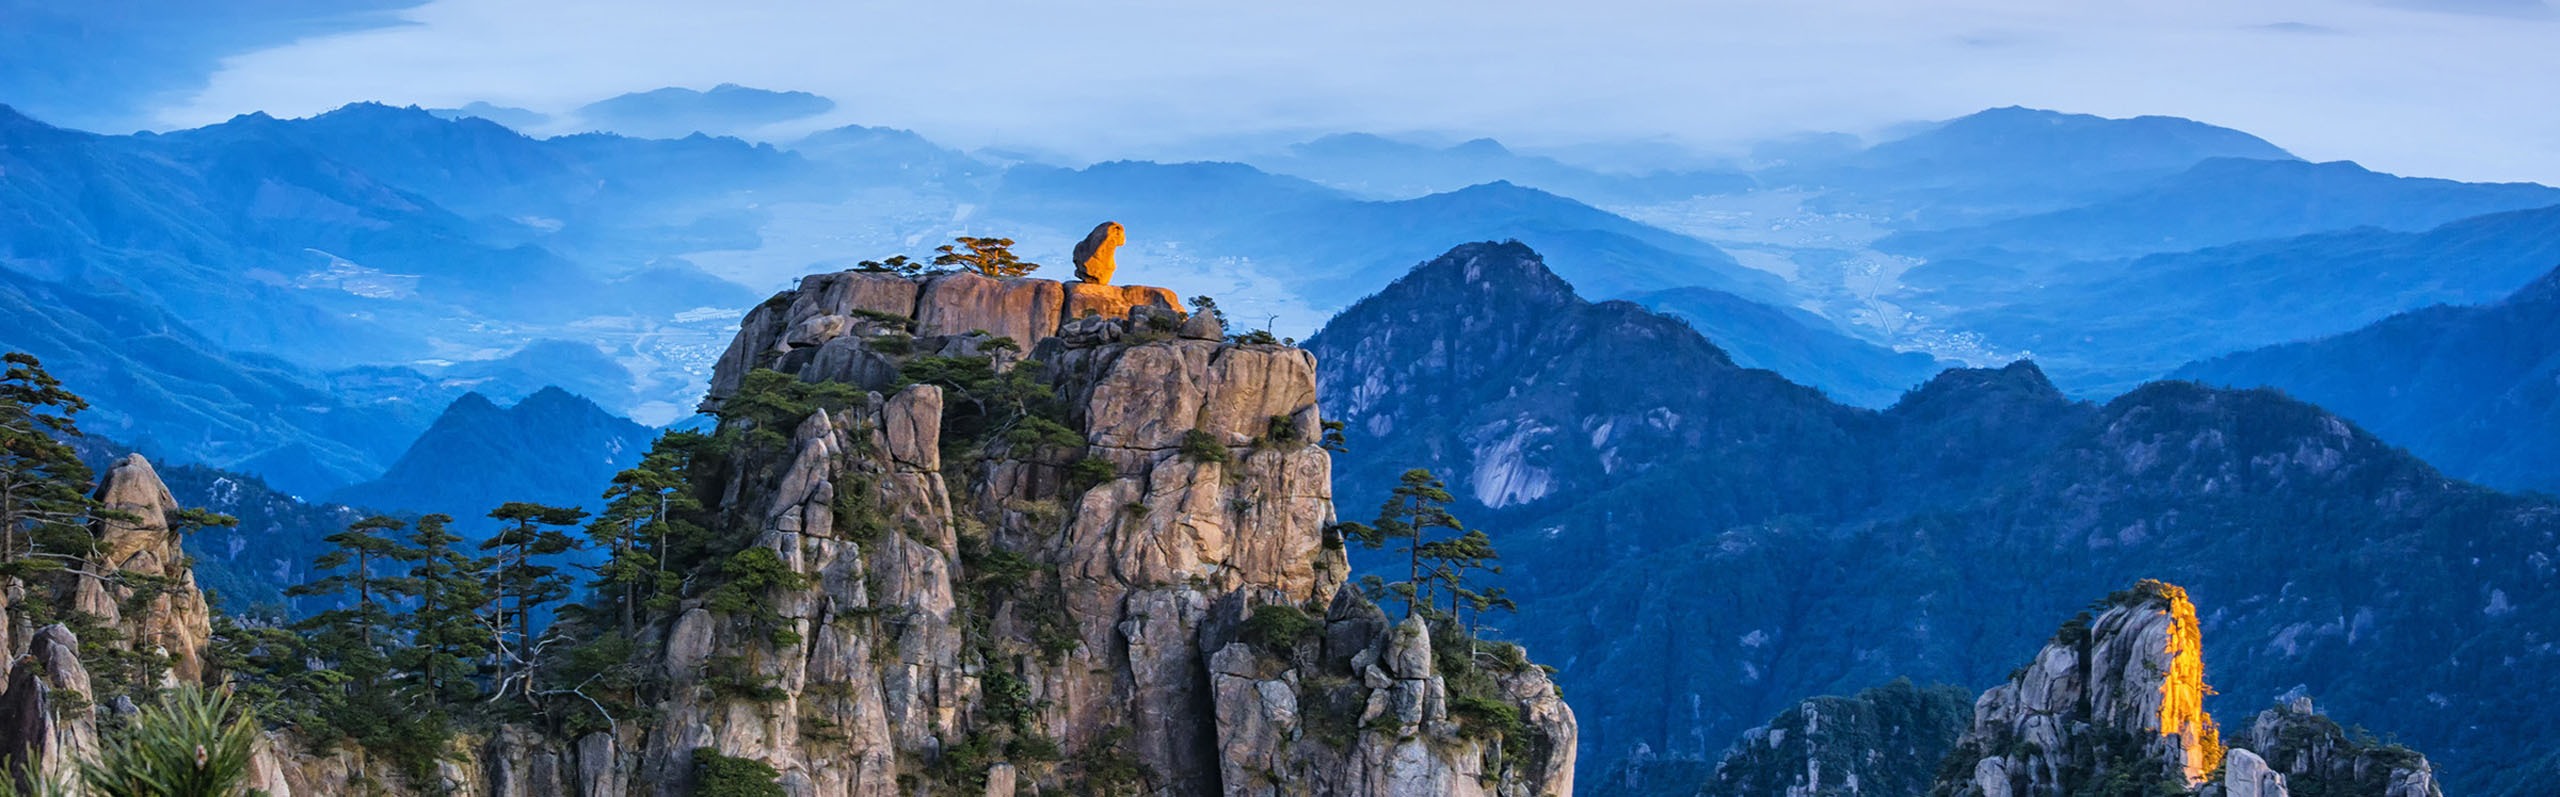 3-Day Essence of Huangshan Tour